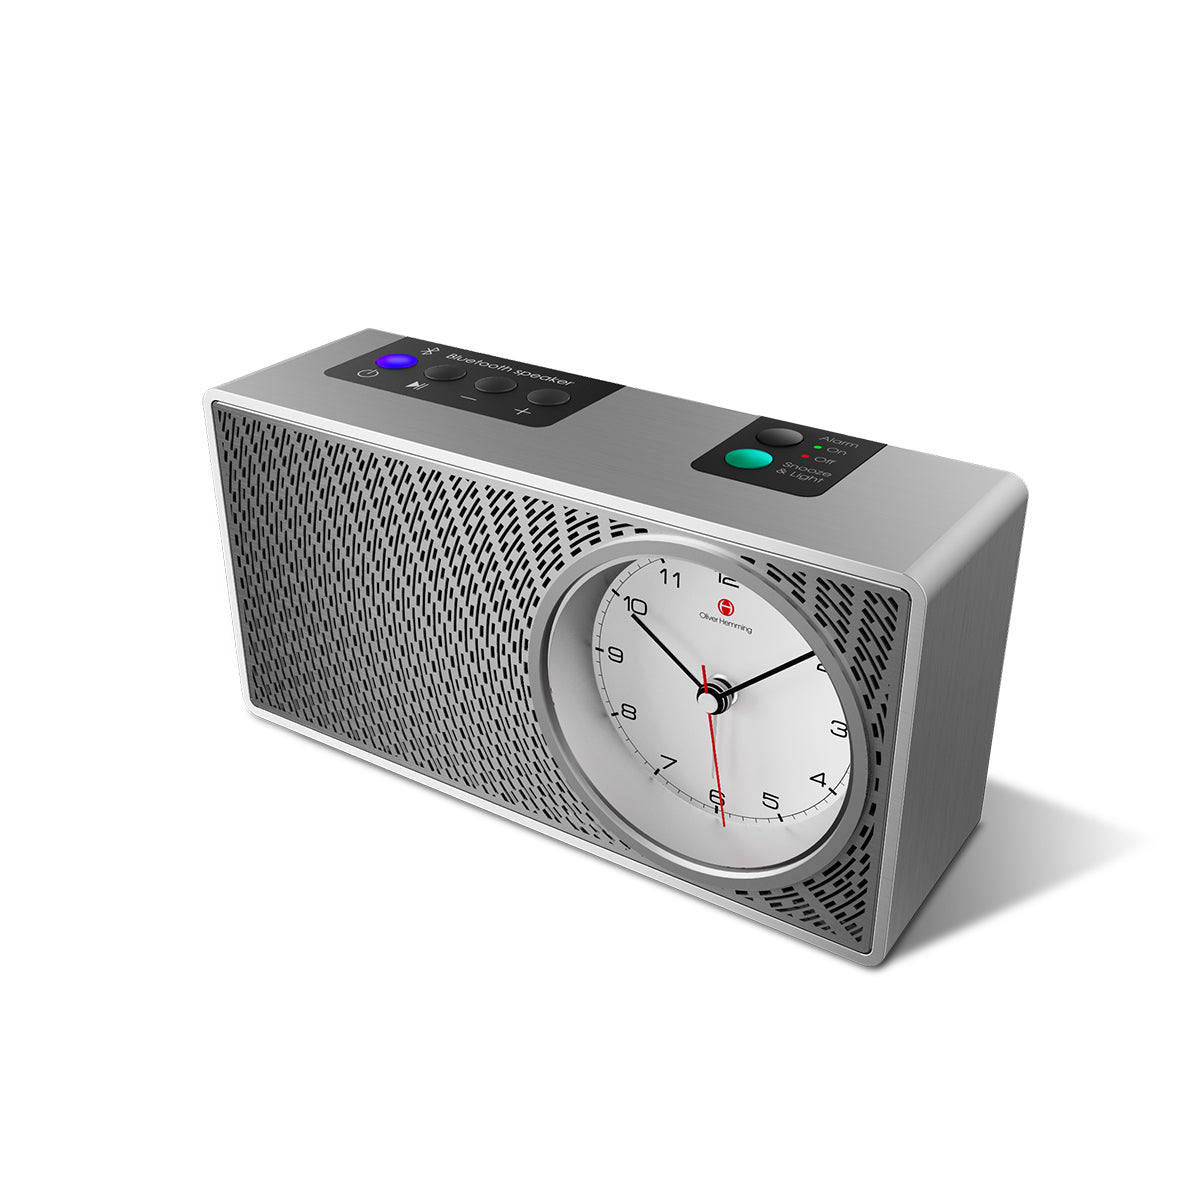 A Pair of Silver Robin Bluetooth Speaker Alarm Clock - RS4S5W